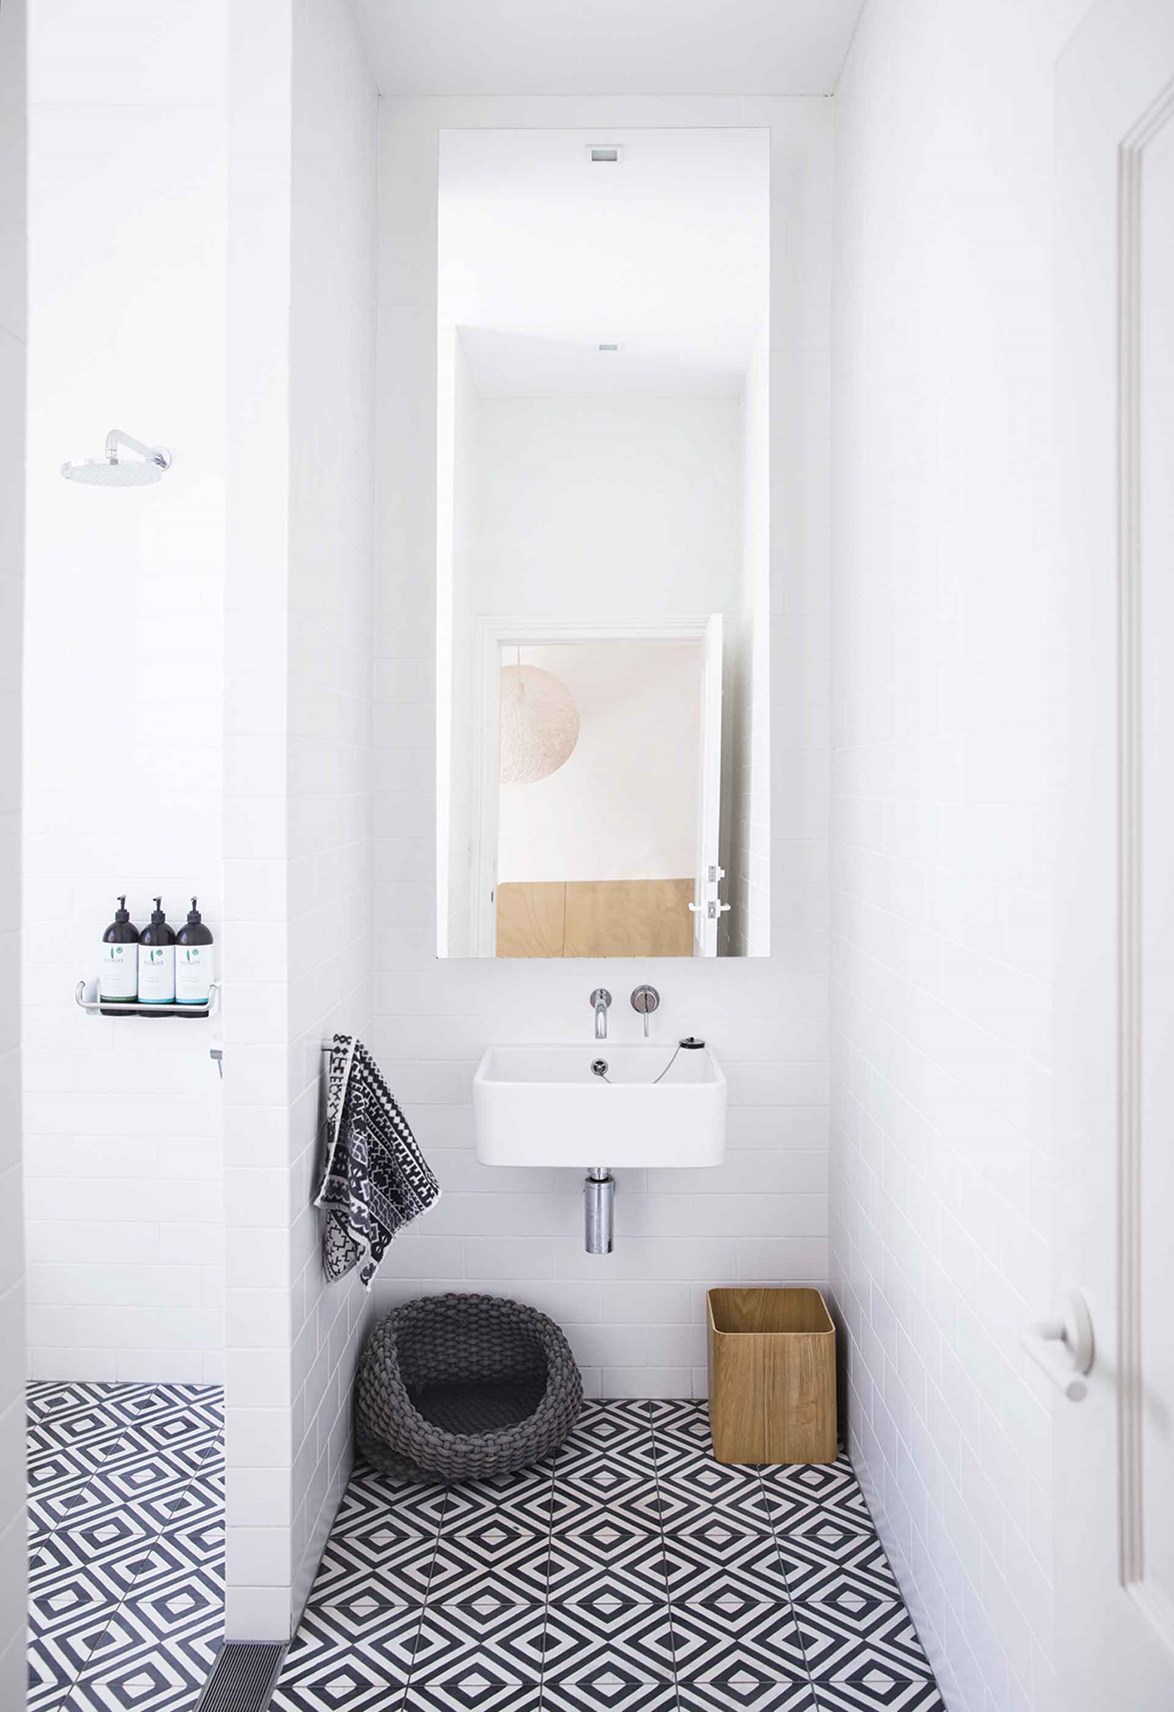 Patterned Popham Design floor tiles from Onsite Supply & Design echo those at the front door of [this Paddington terrace](https://www.homestolove.com.au/relaxed-terrace-paddington-18366|target="_blank") creating a cohesive feel throughout.